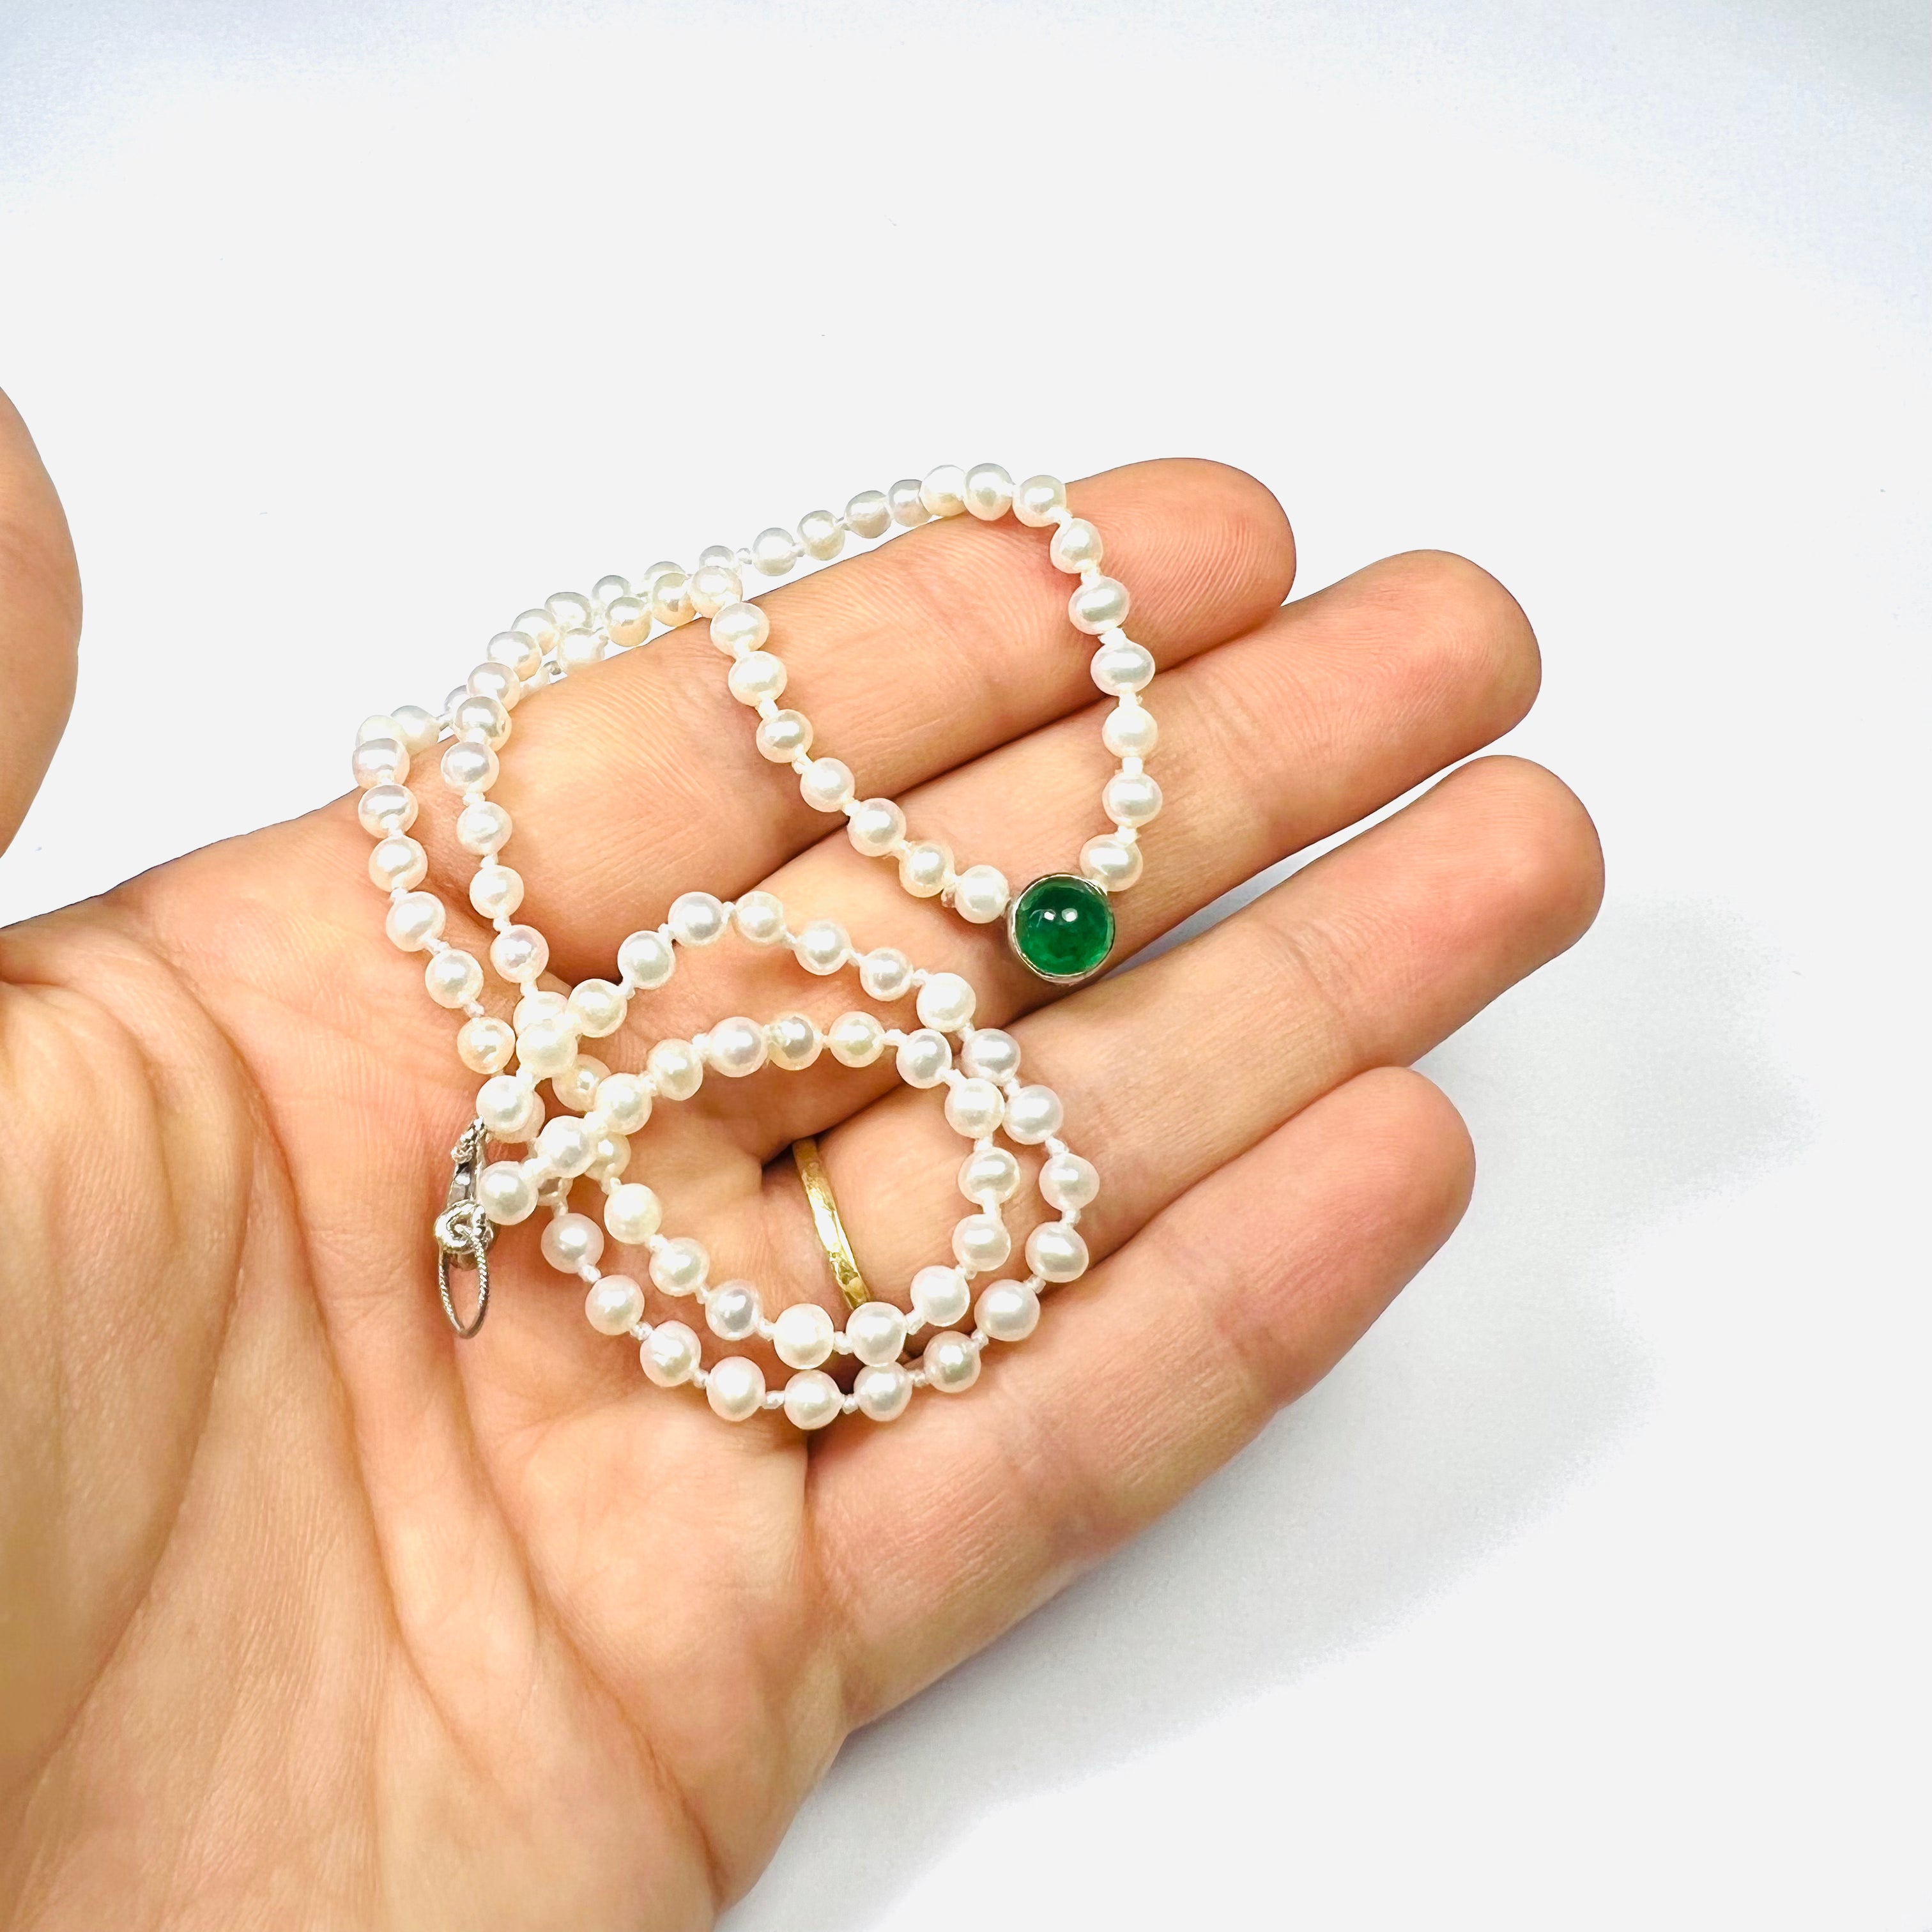 Beaded Pearl Necklace with Emerald 14K White Gold Clasp 16"